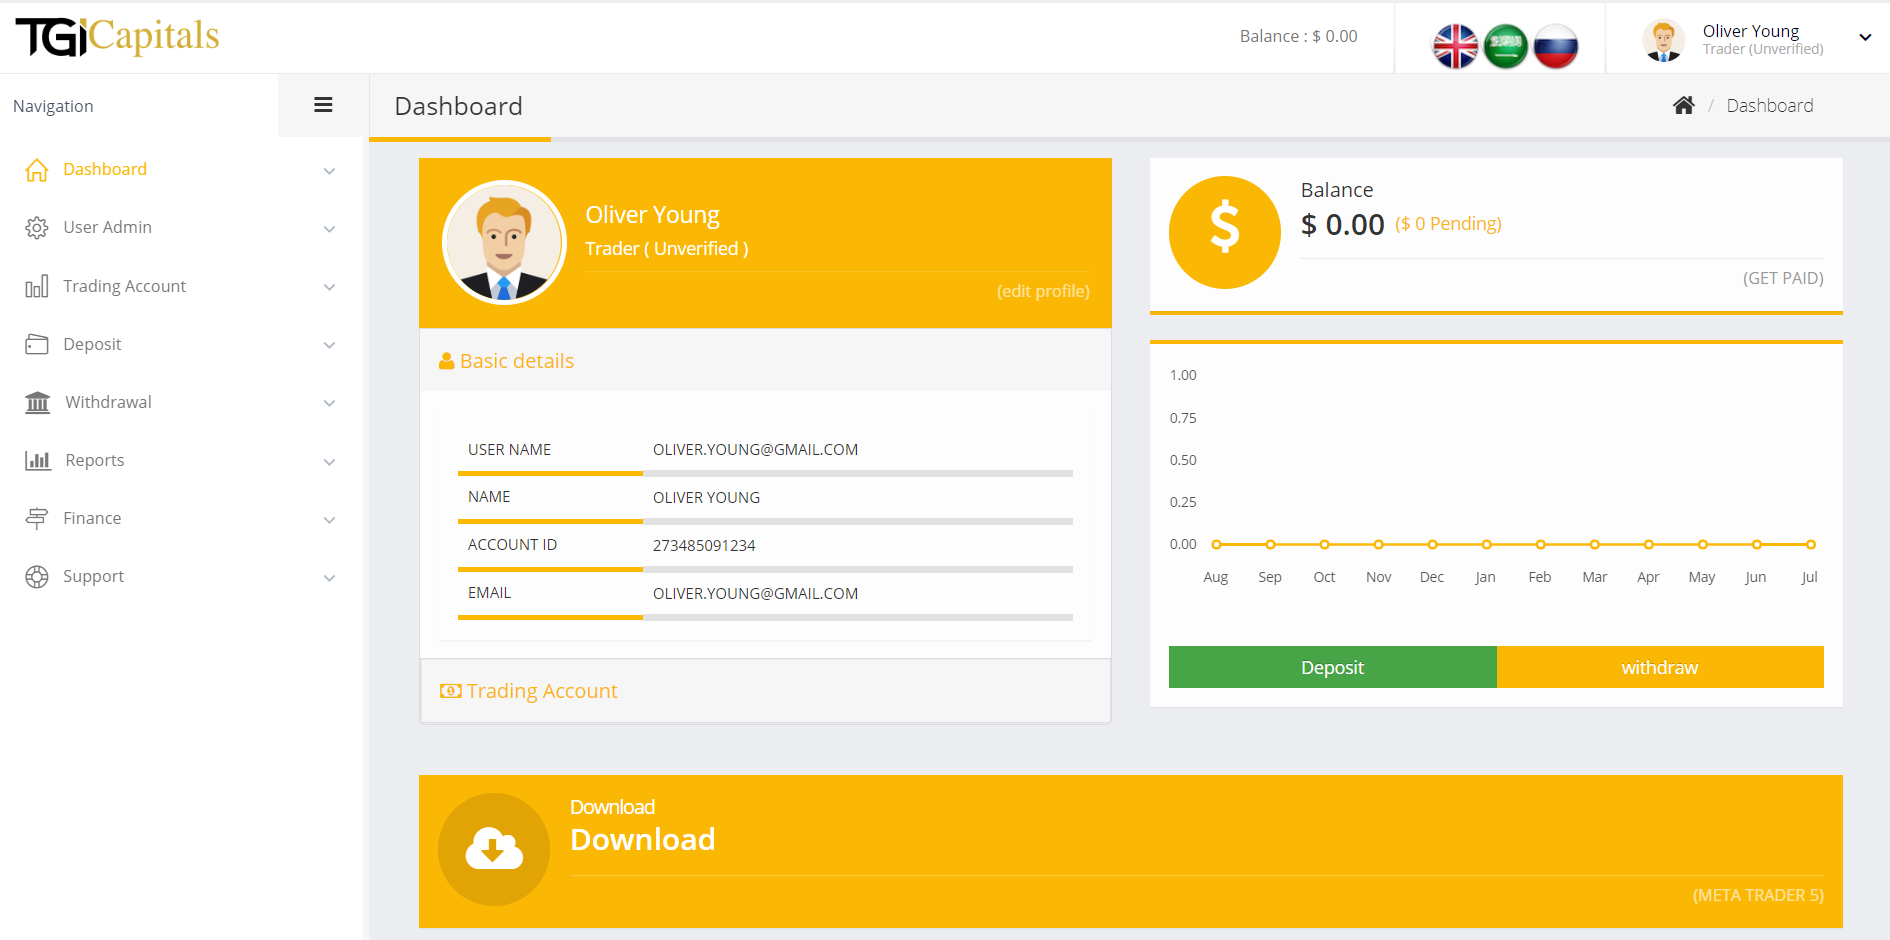 The dashboard presents a rather simplistic view of the client’s profile